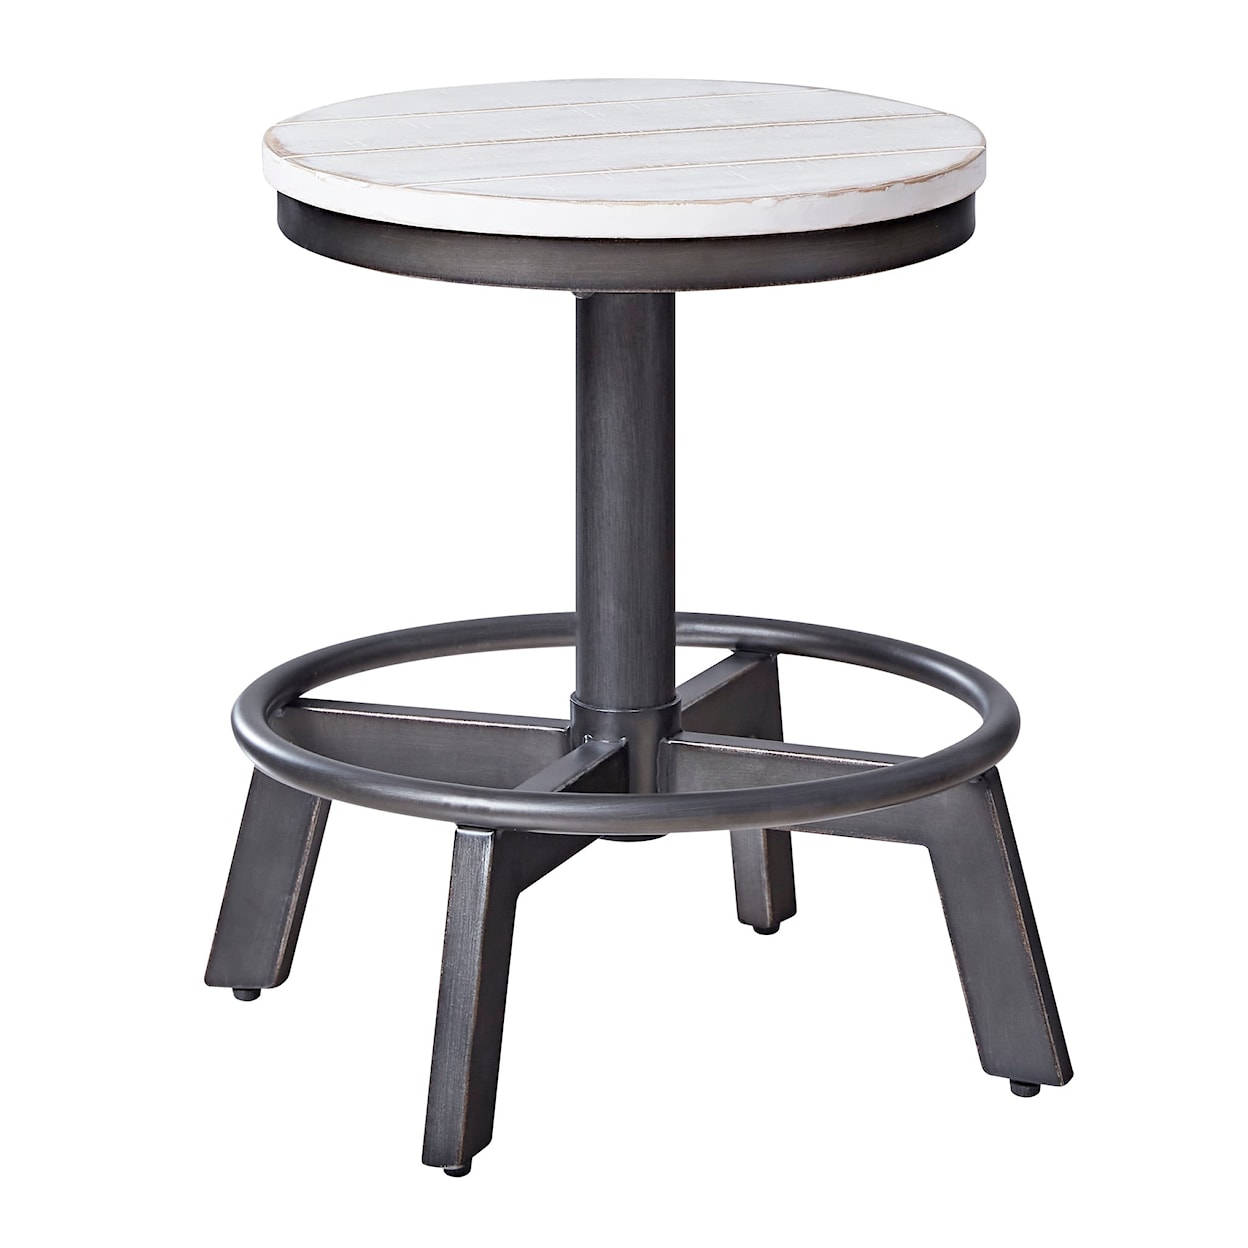 Signature Design by Ashley Furniture Torjin Counter Height Stool